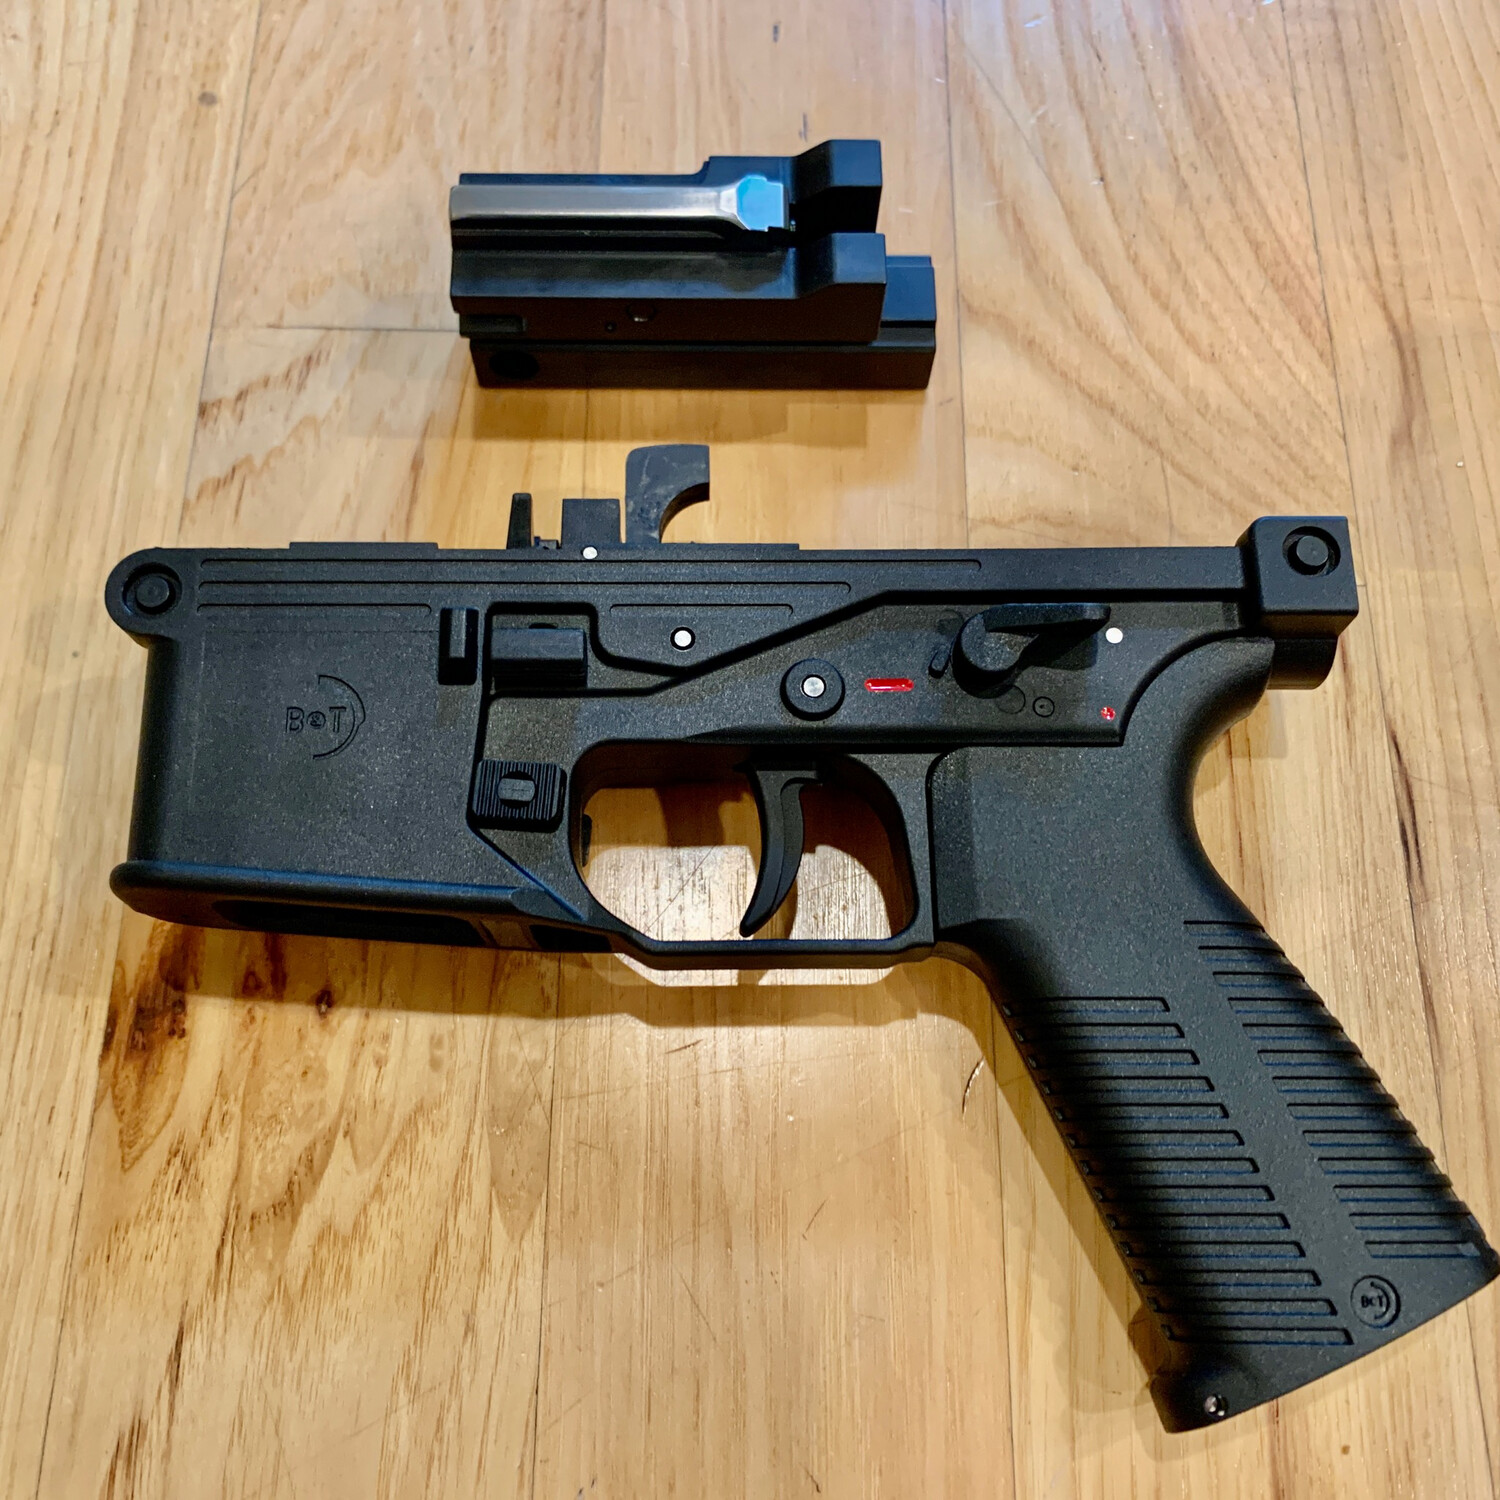 Full Auto APC/K Pro 9mm Lower and Bolt. Fits 922 Compliant APC9/9K Pro. ***Must Be FFL Manufacture/SOT to purchase***